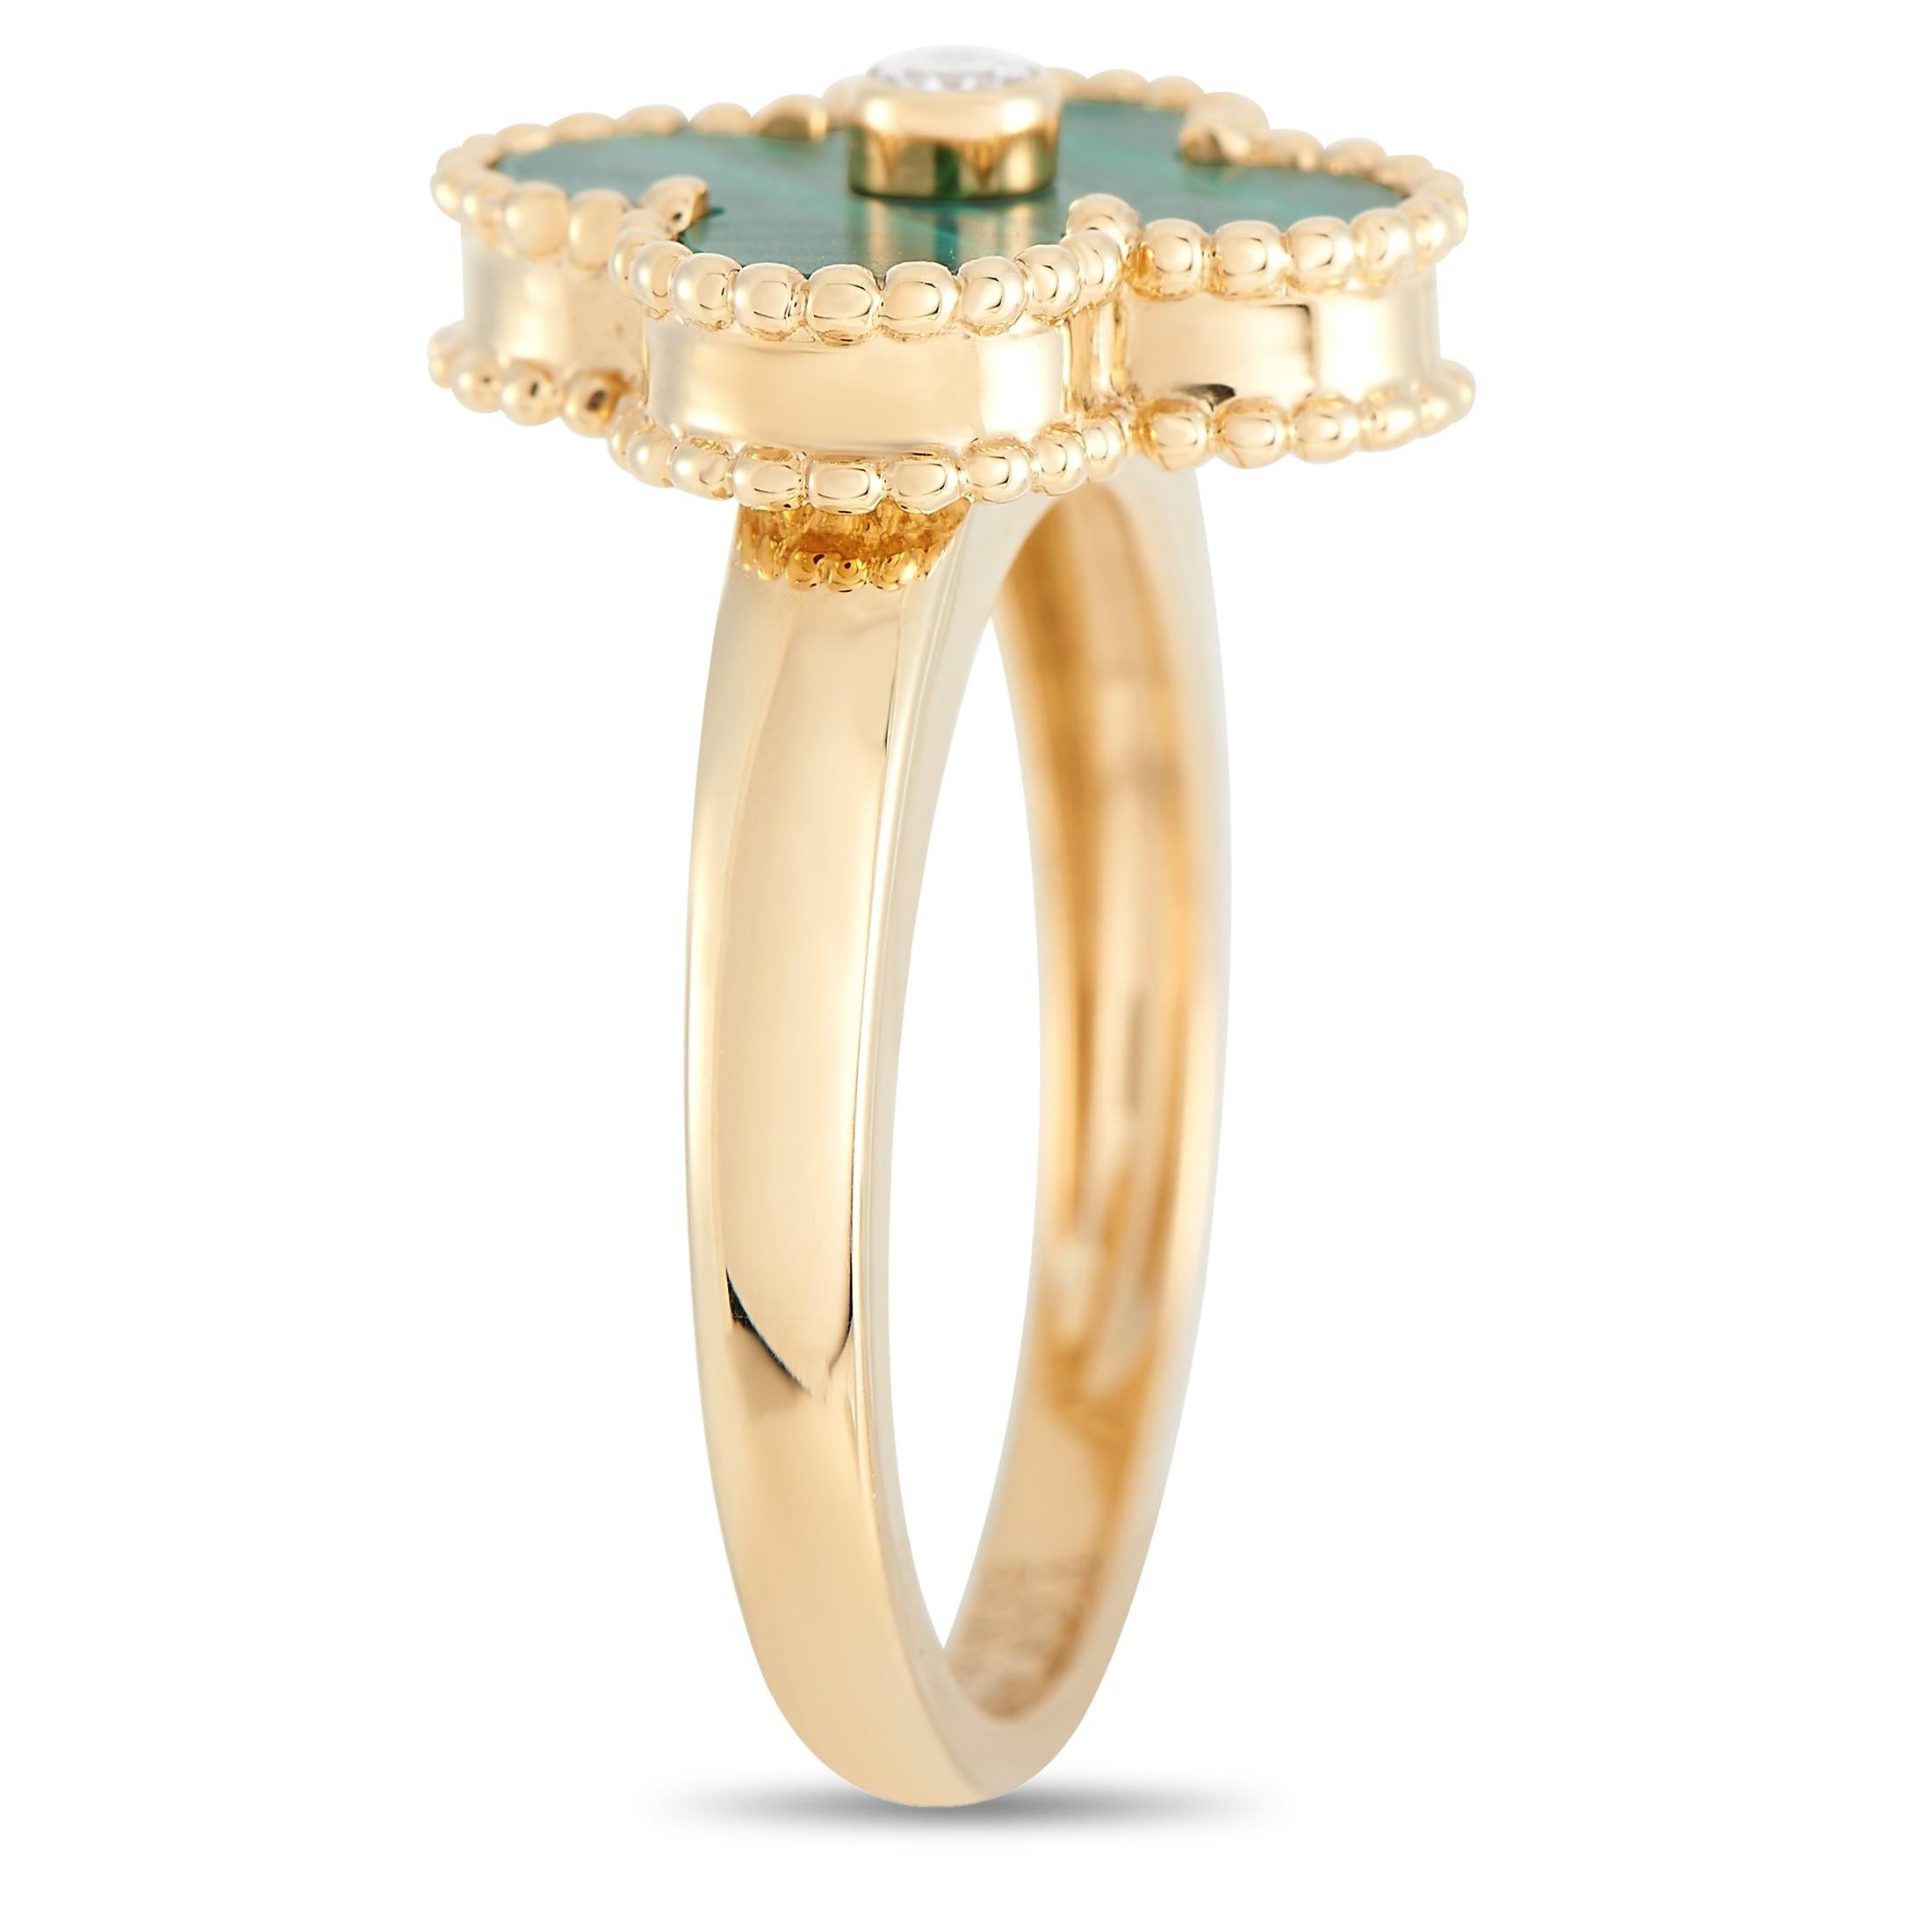 The Van Cleef & Arpels Alhambra symbol takes center stage on this impeccable ring. Set upon an 18K Yellow Gold band measuring 2mm wide, you’ll find a clover-shaped accent adorned with captivating green Malachite and a singular diamond center stone.